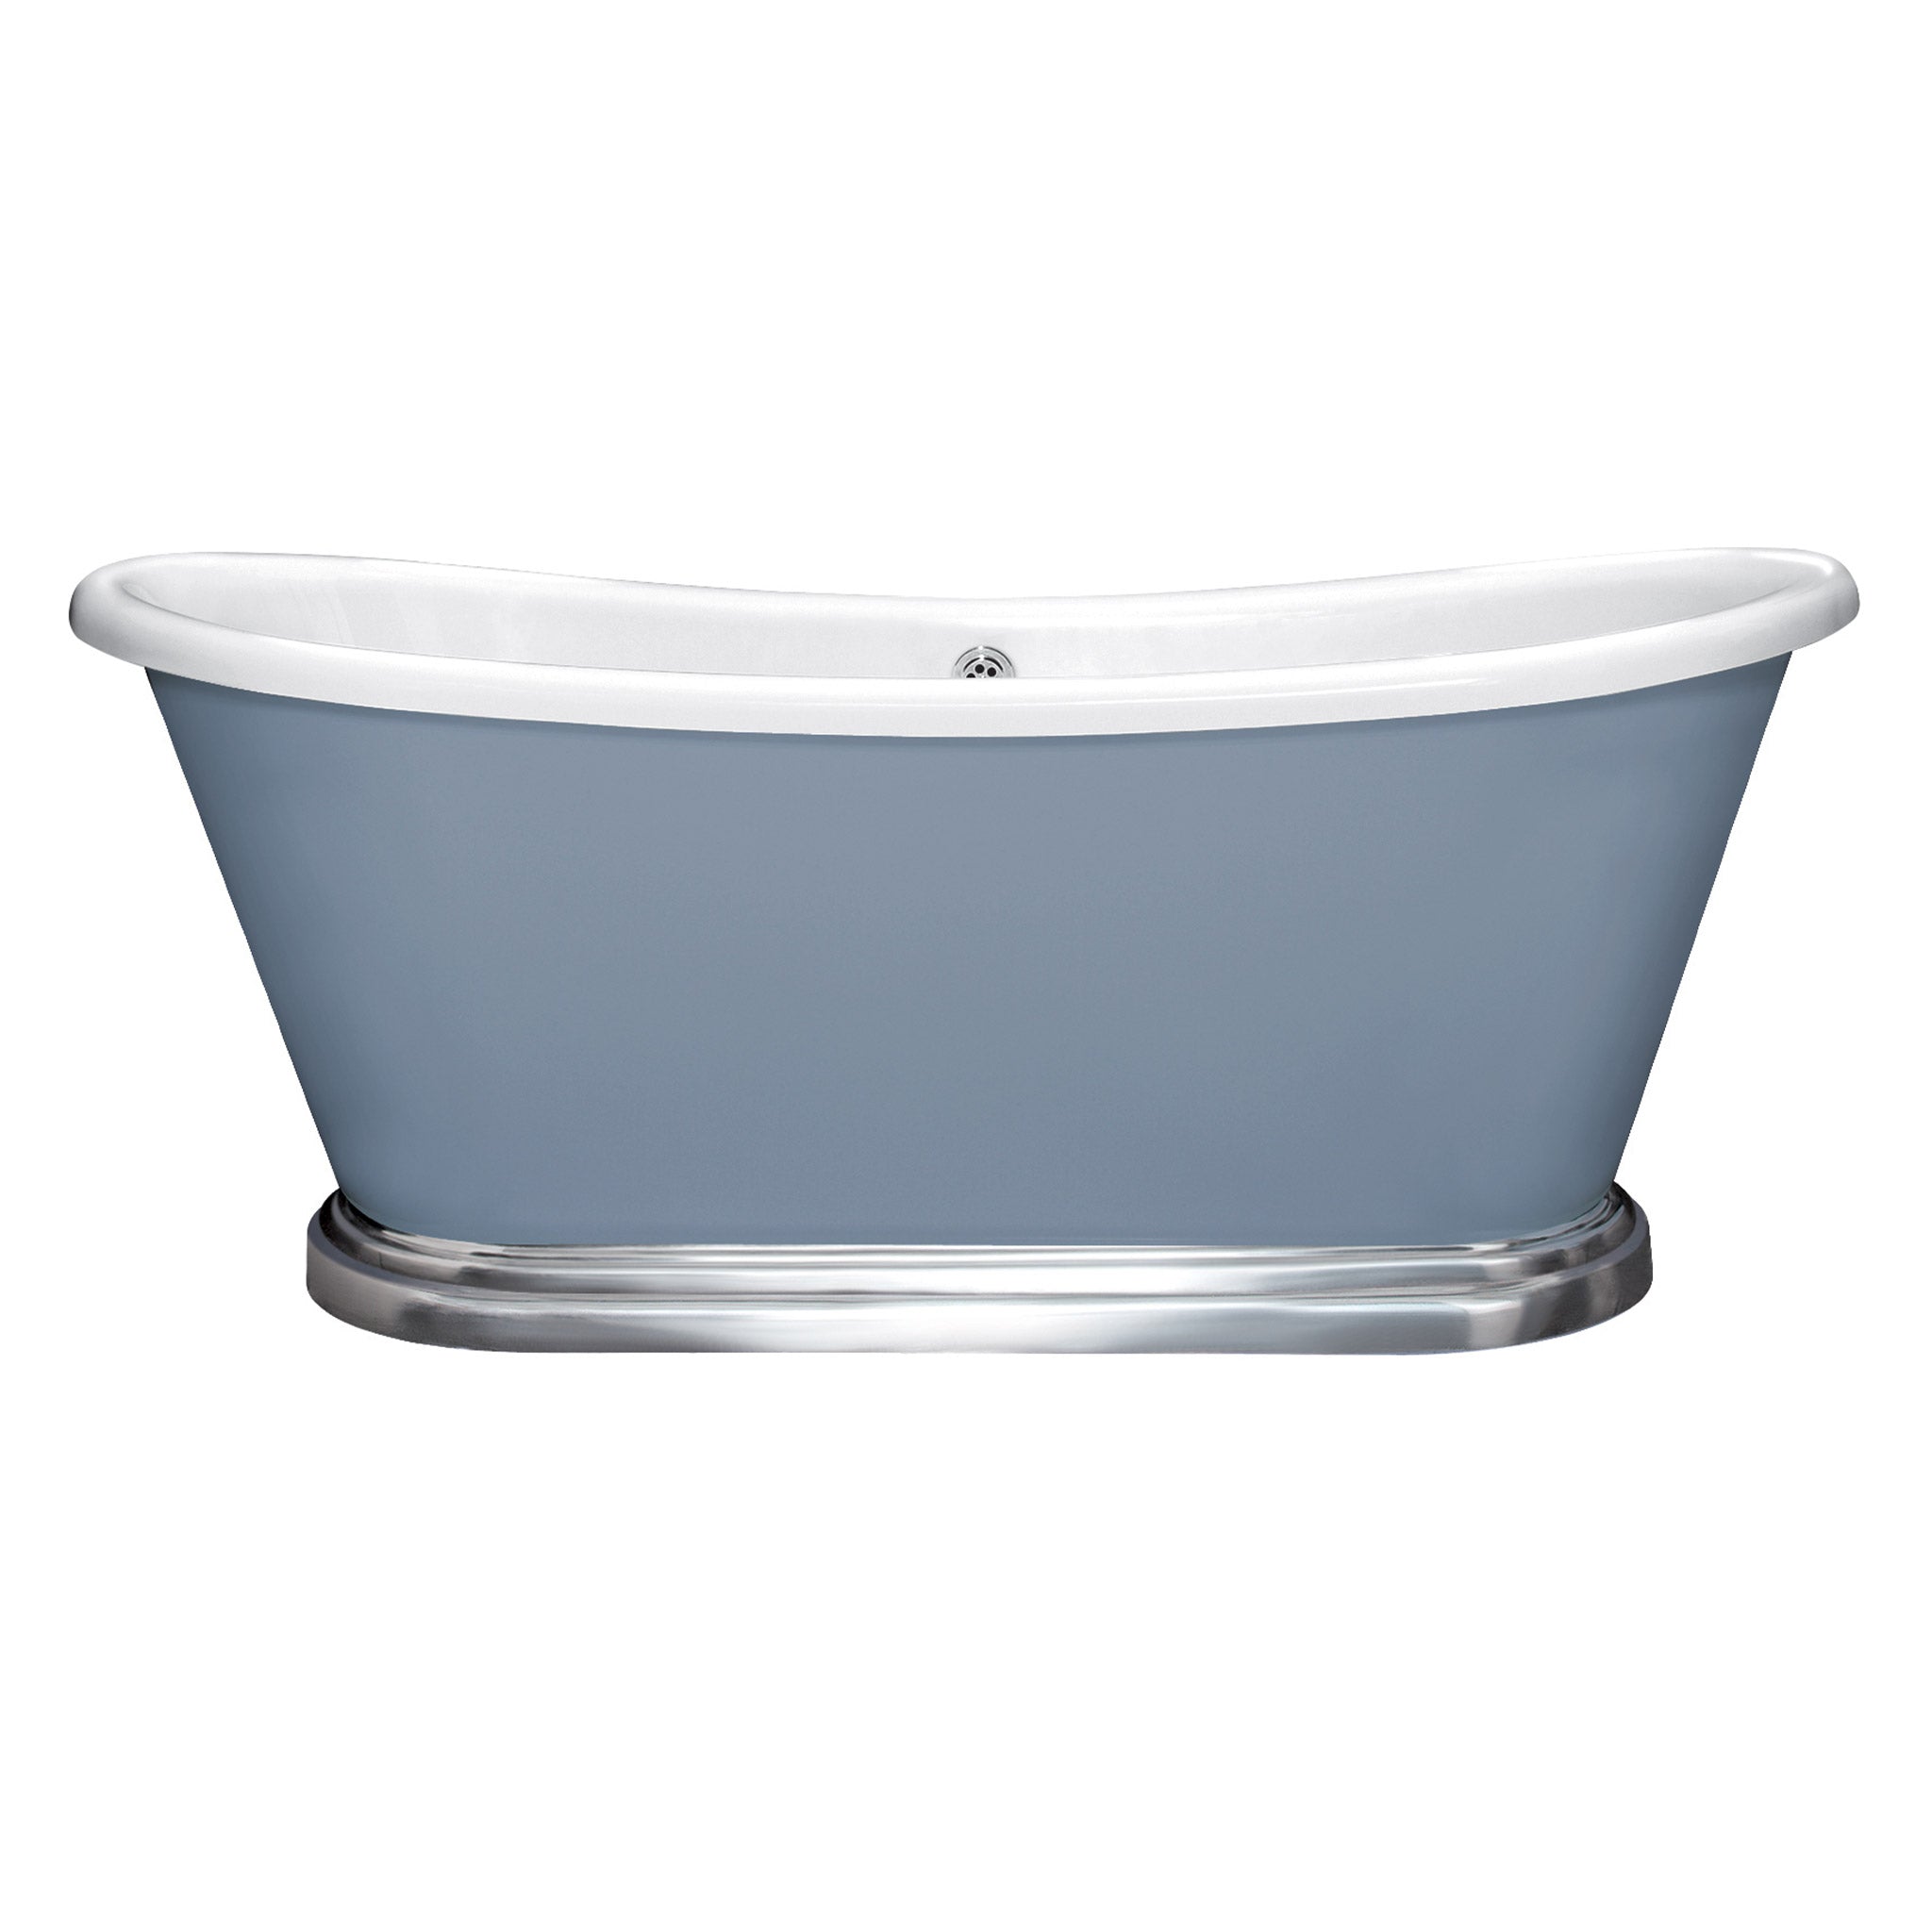 BC Designs Acrylic The Boat Double Ended Roll Top Bath With Aluminium Plinth 1700 x 750mm